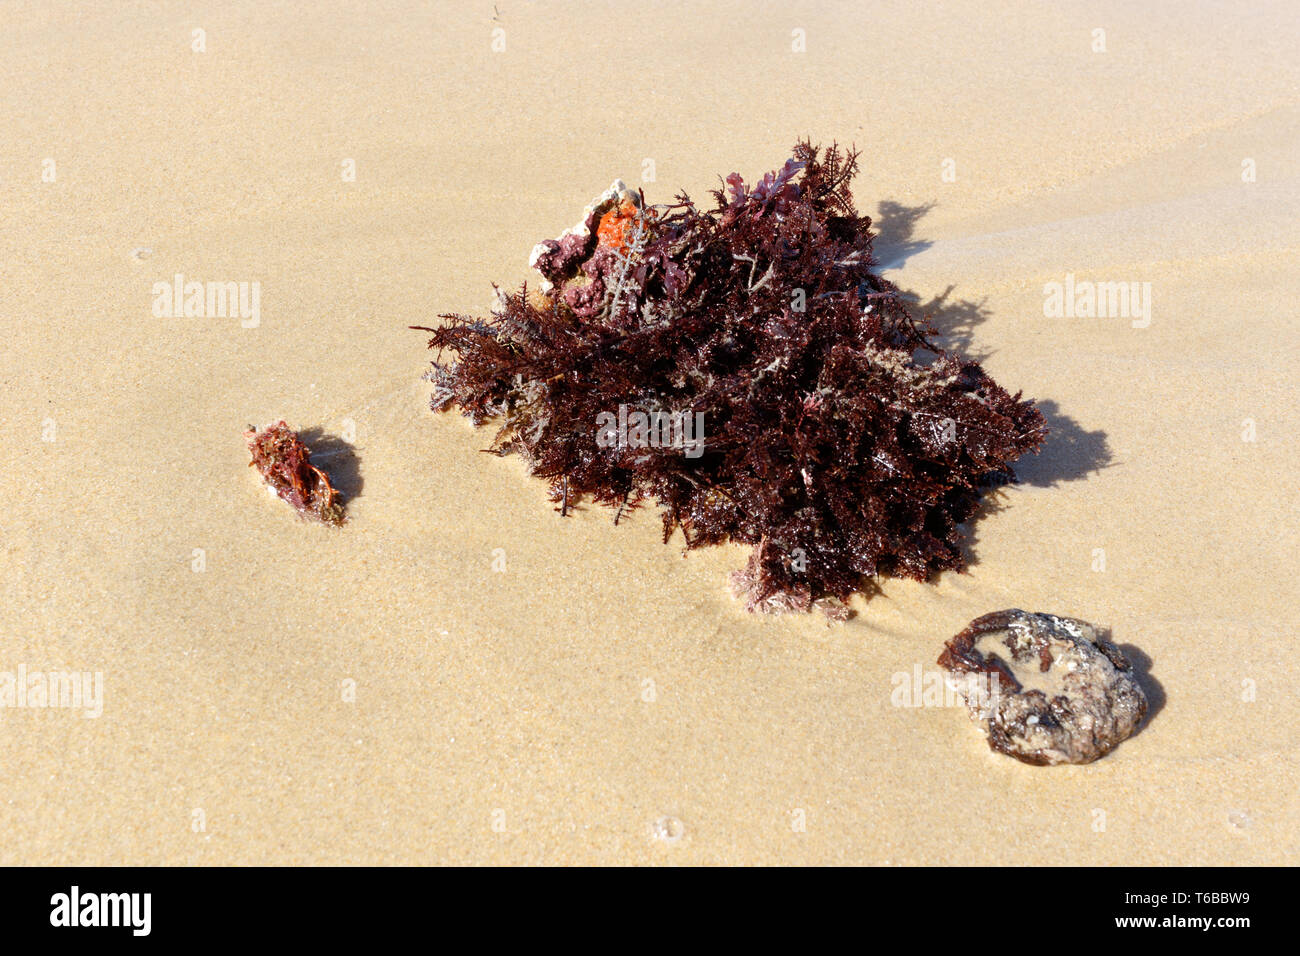 Red seaweed on the sand Stock Photo